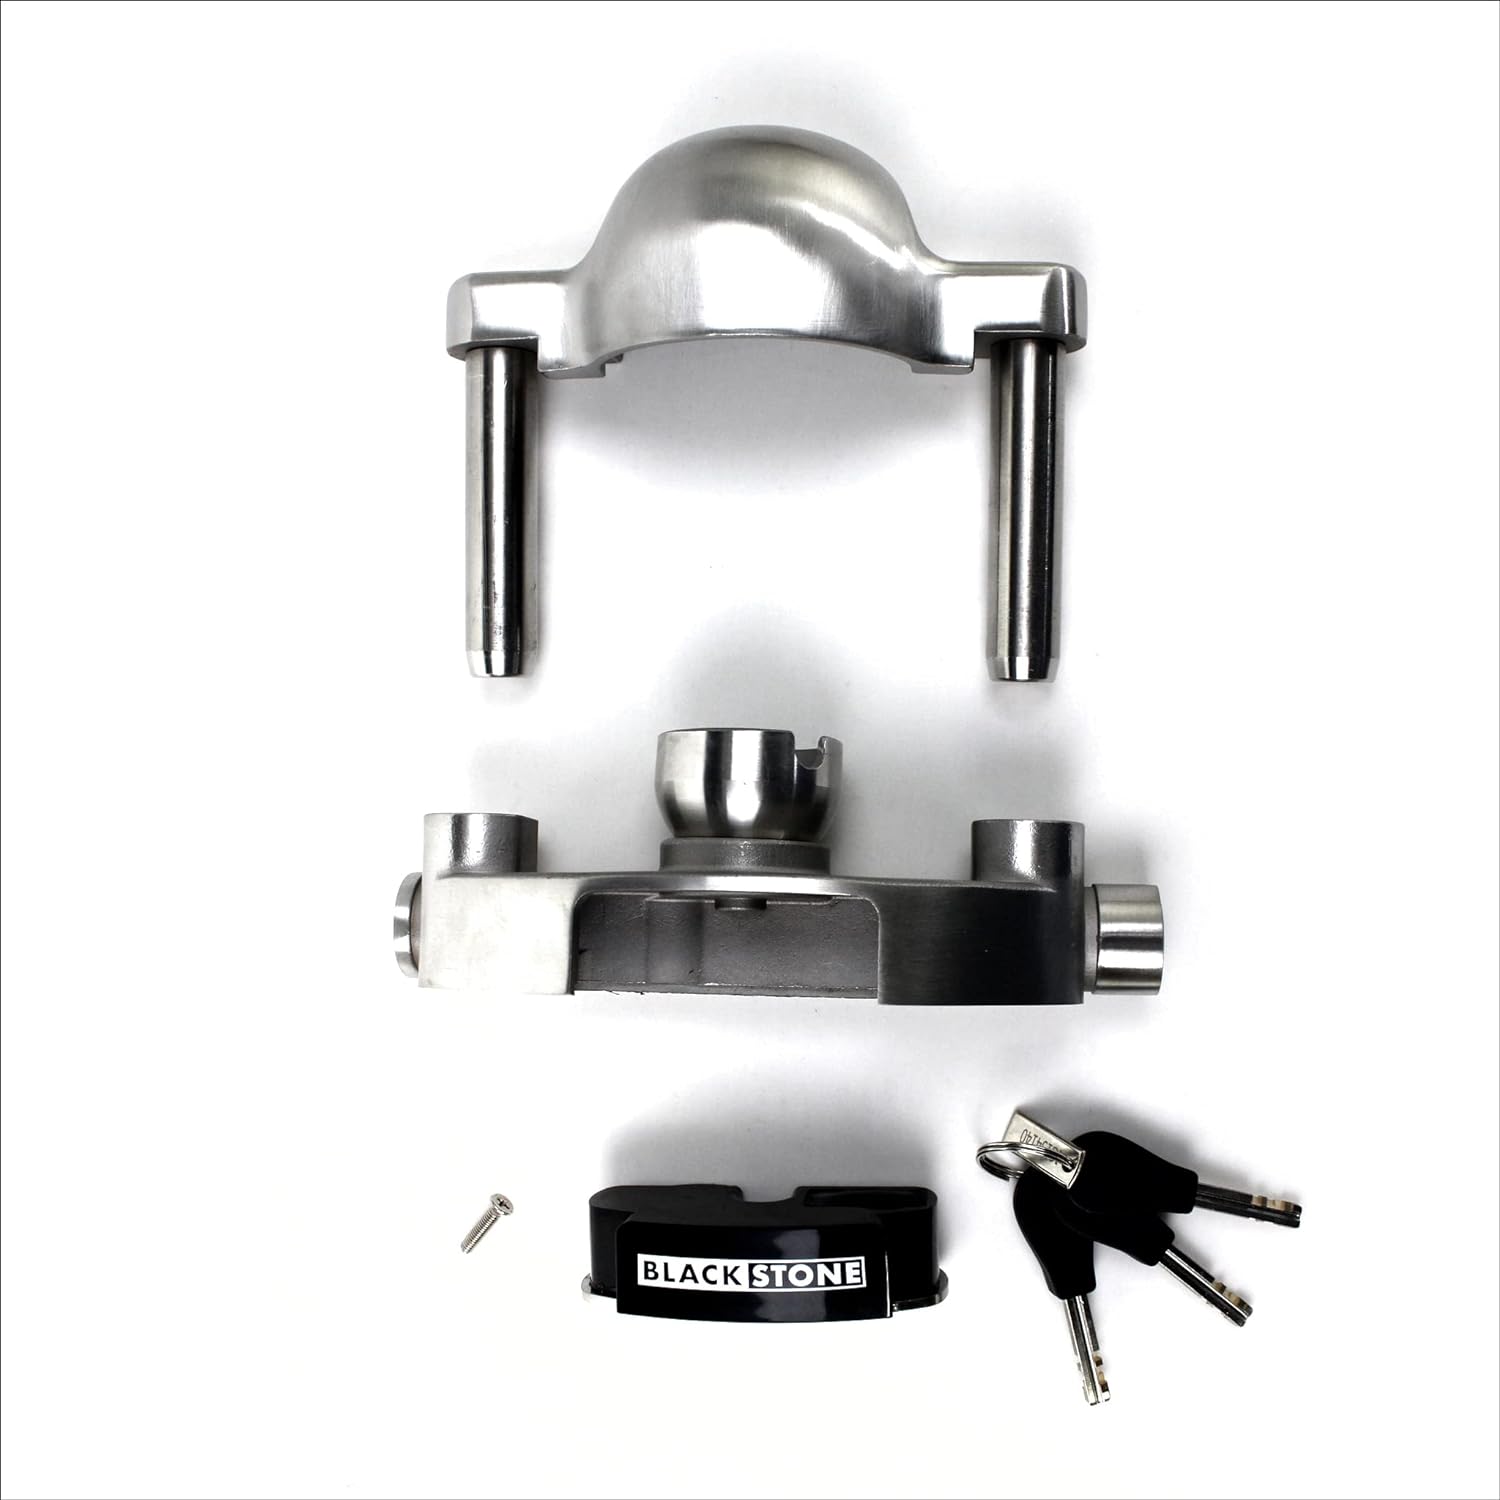 Disassembled view of a Black Stone lock, featuring the top bar, locking base, a cover with the brand name, and keys, all laid out on a white background